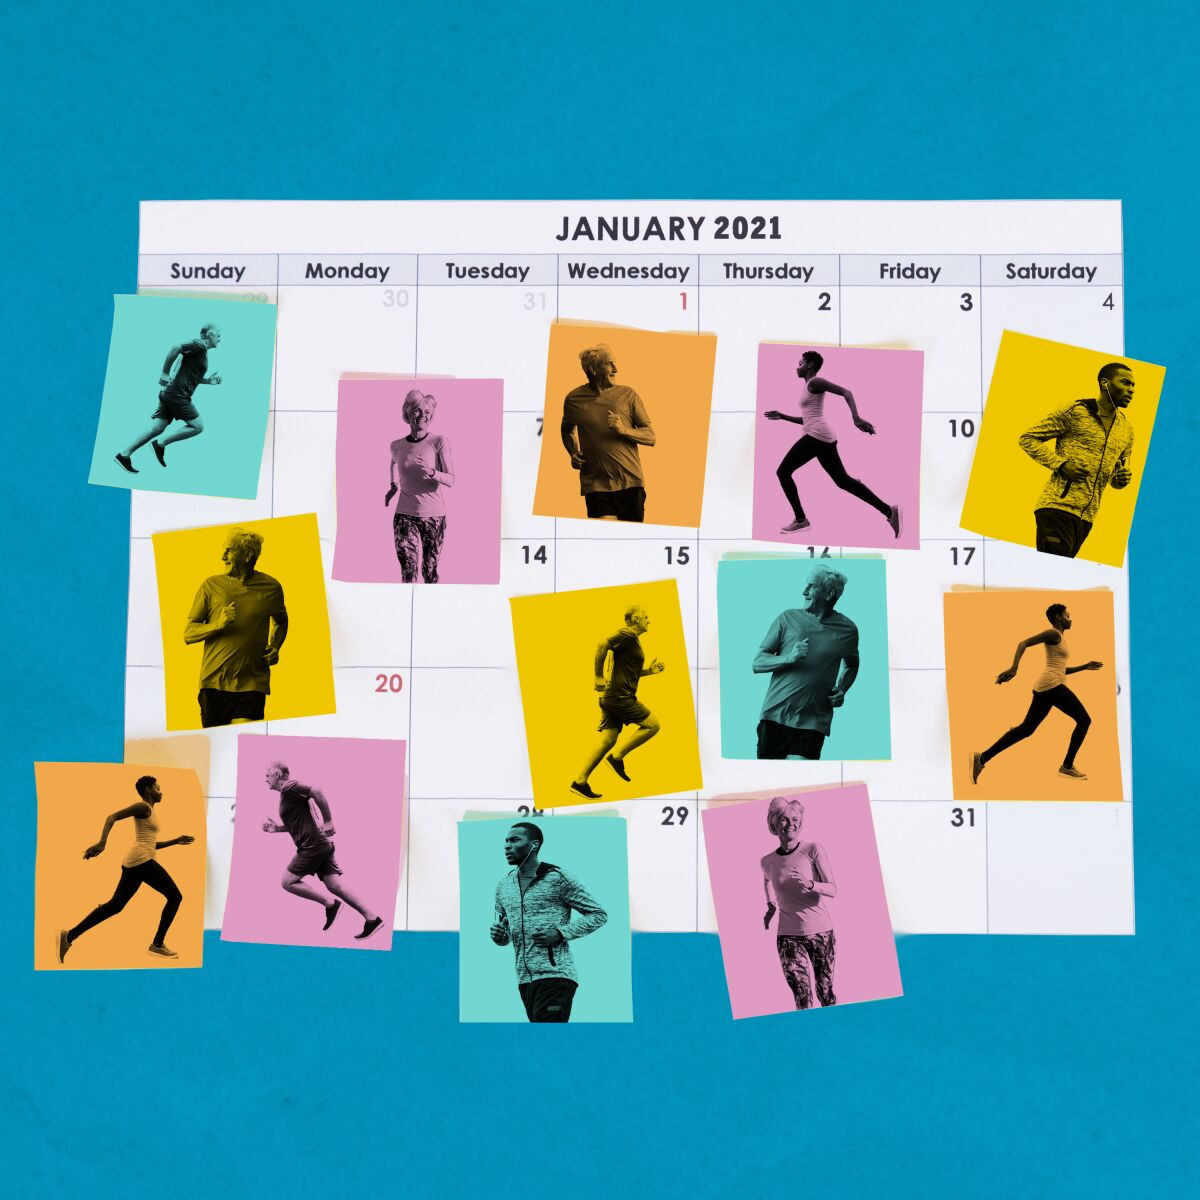 Illustration shows figures running, placed on a calendar.